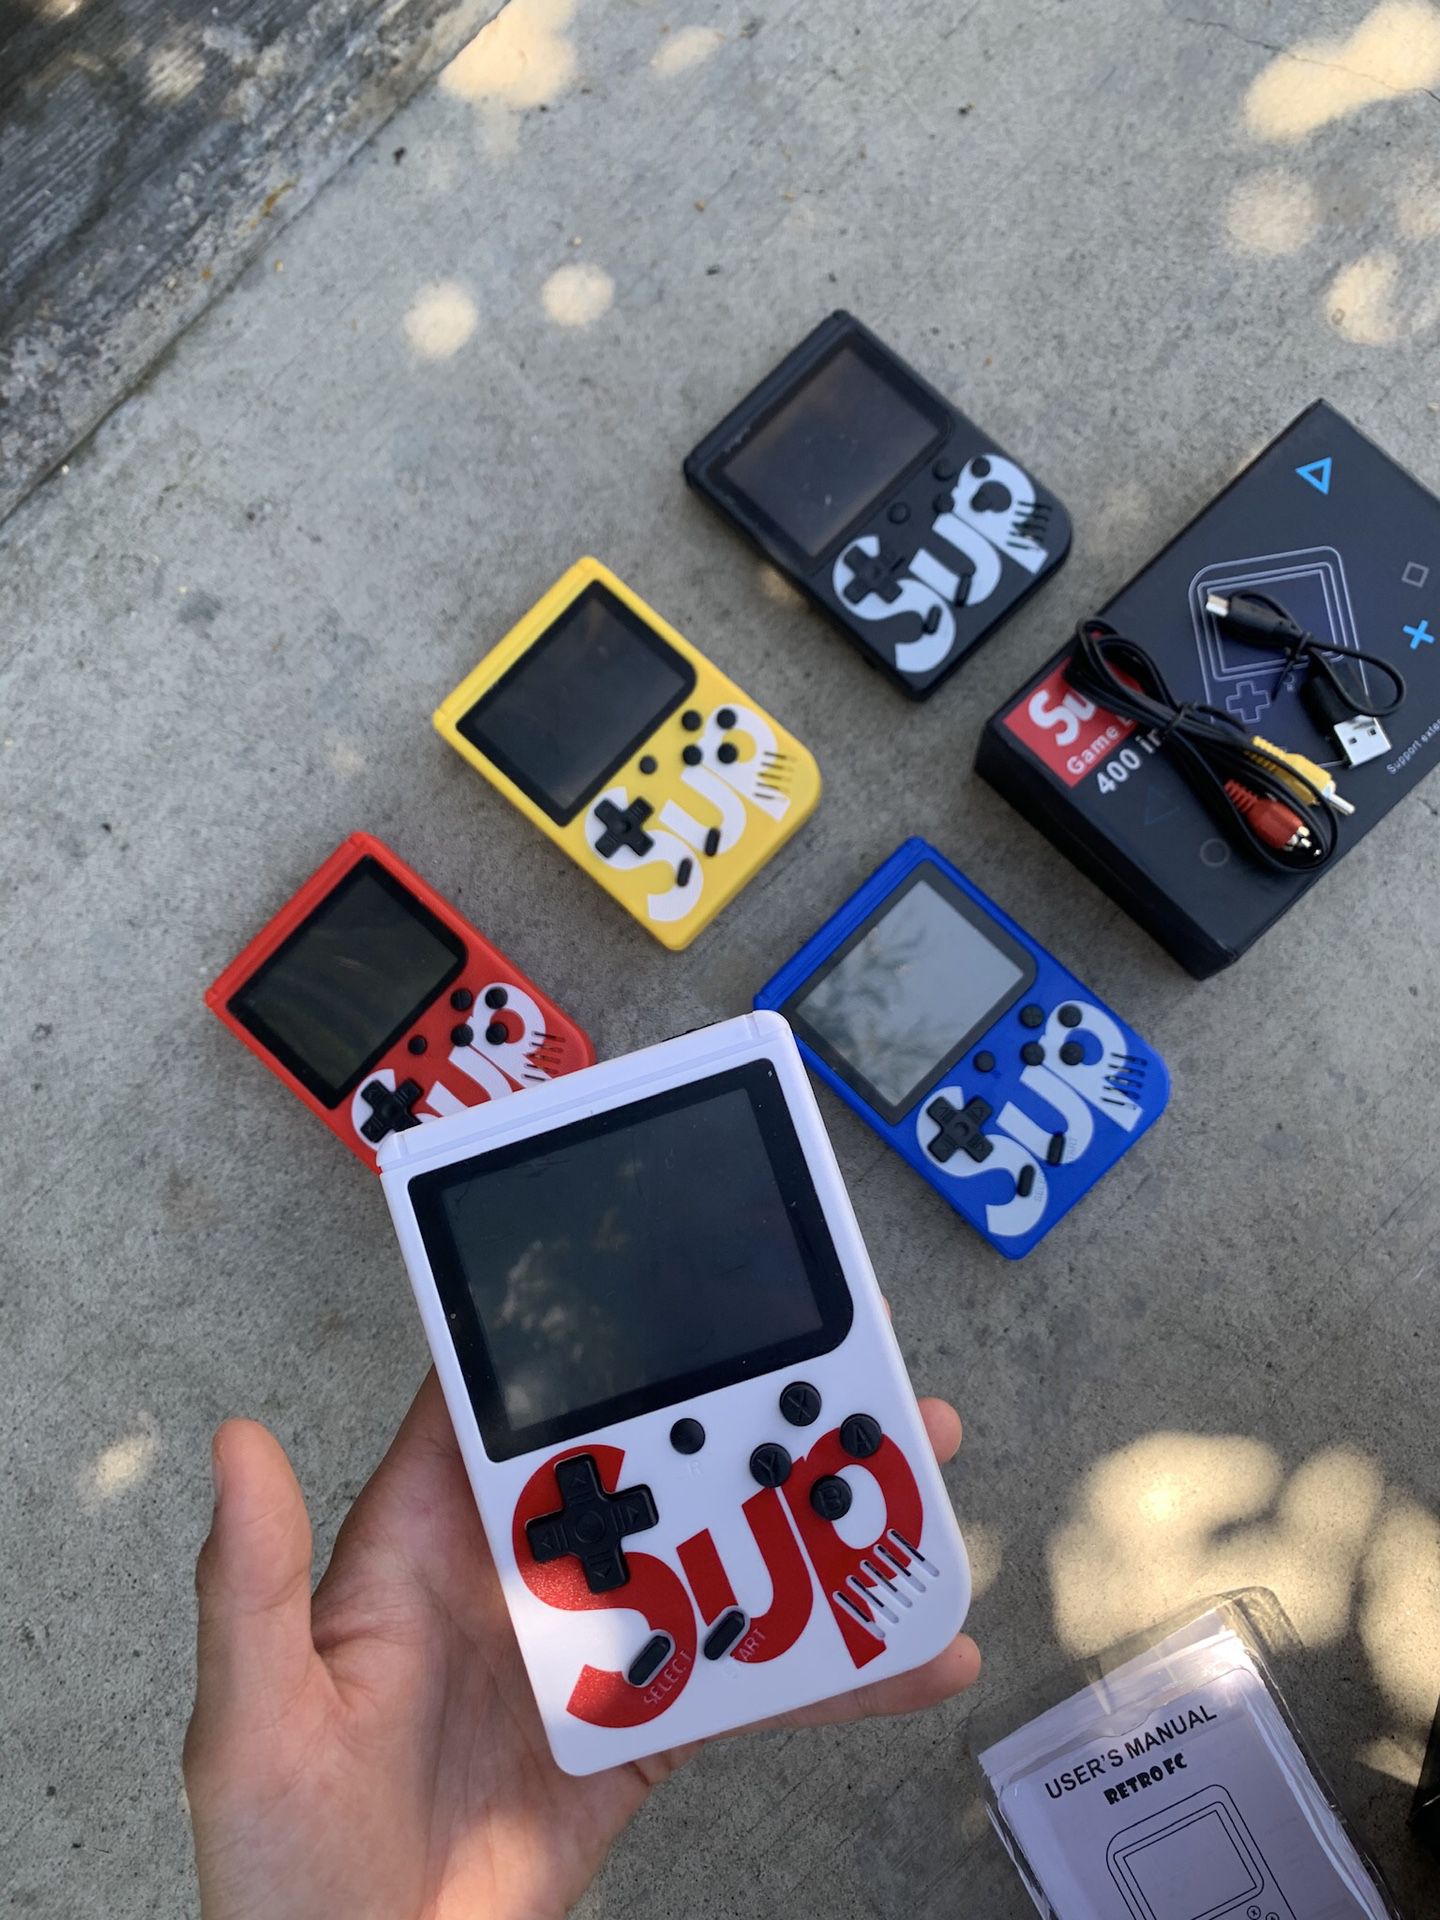 🔥New in box $20 each 400 games in 1 handheld retro classic game boy style console with rechargeable battery 8 bit Classic nintendo games